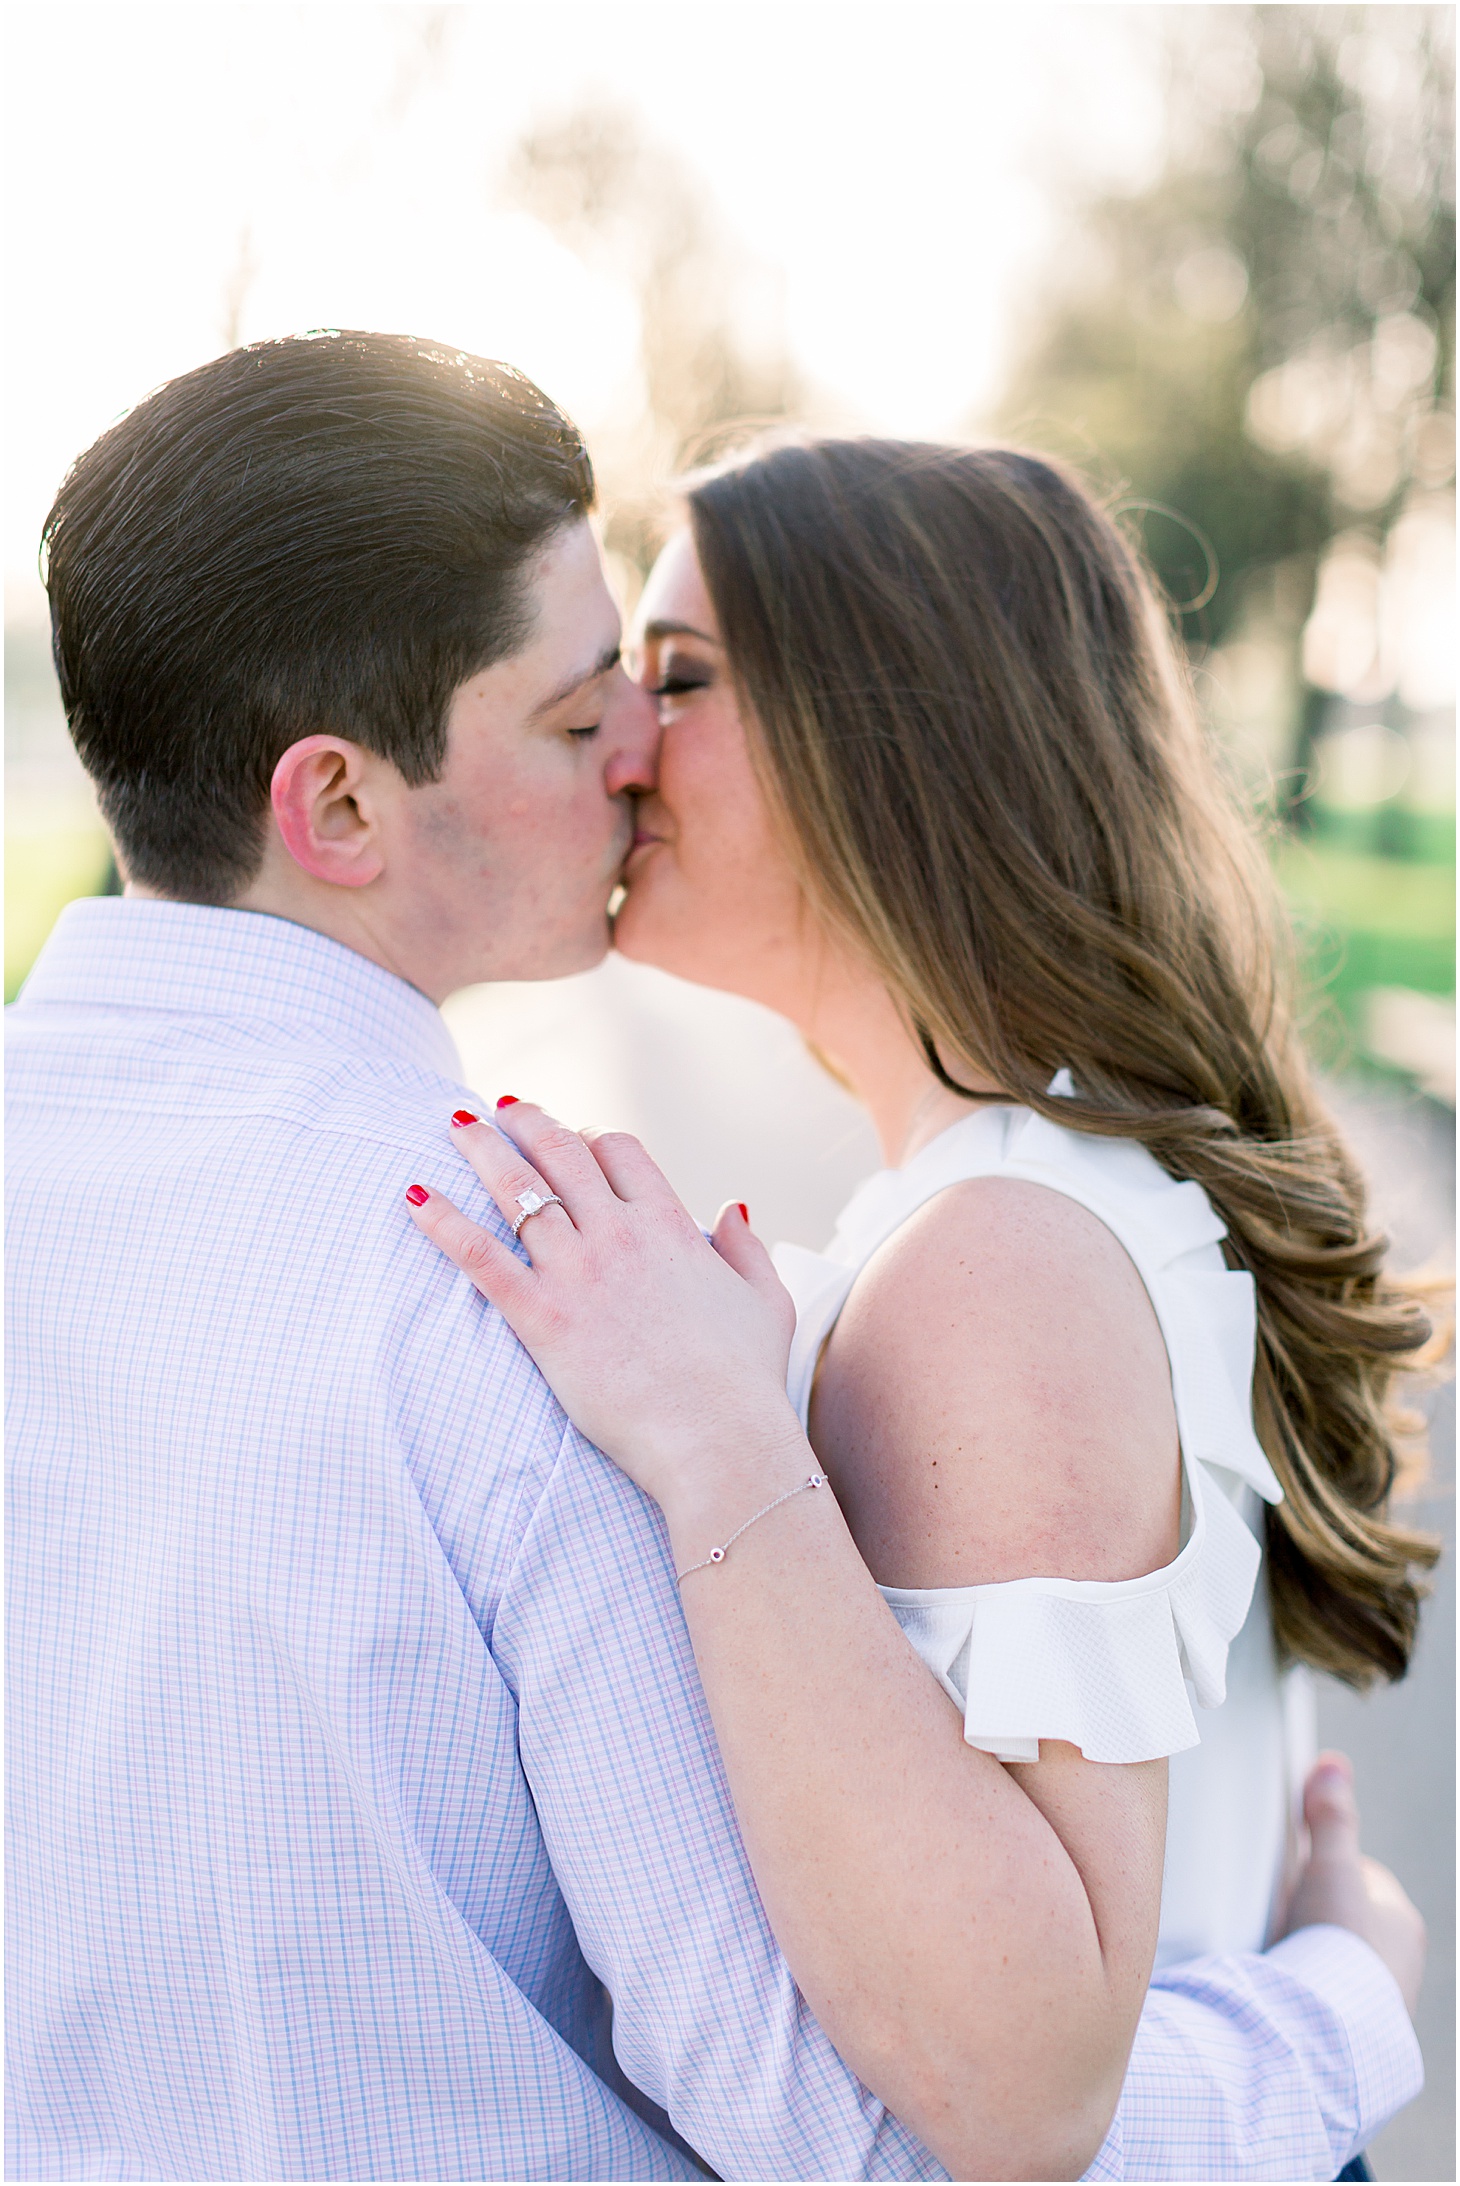 Engagement Portraits at National Mall, Stylish Sunrise Engagement Session at Lincoln Memorial, Sarah Bradshaw Photography